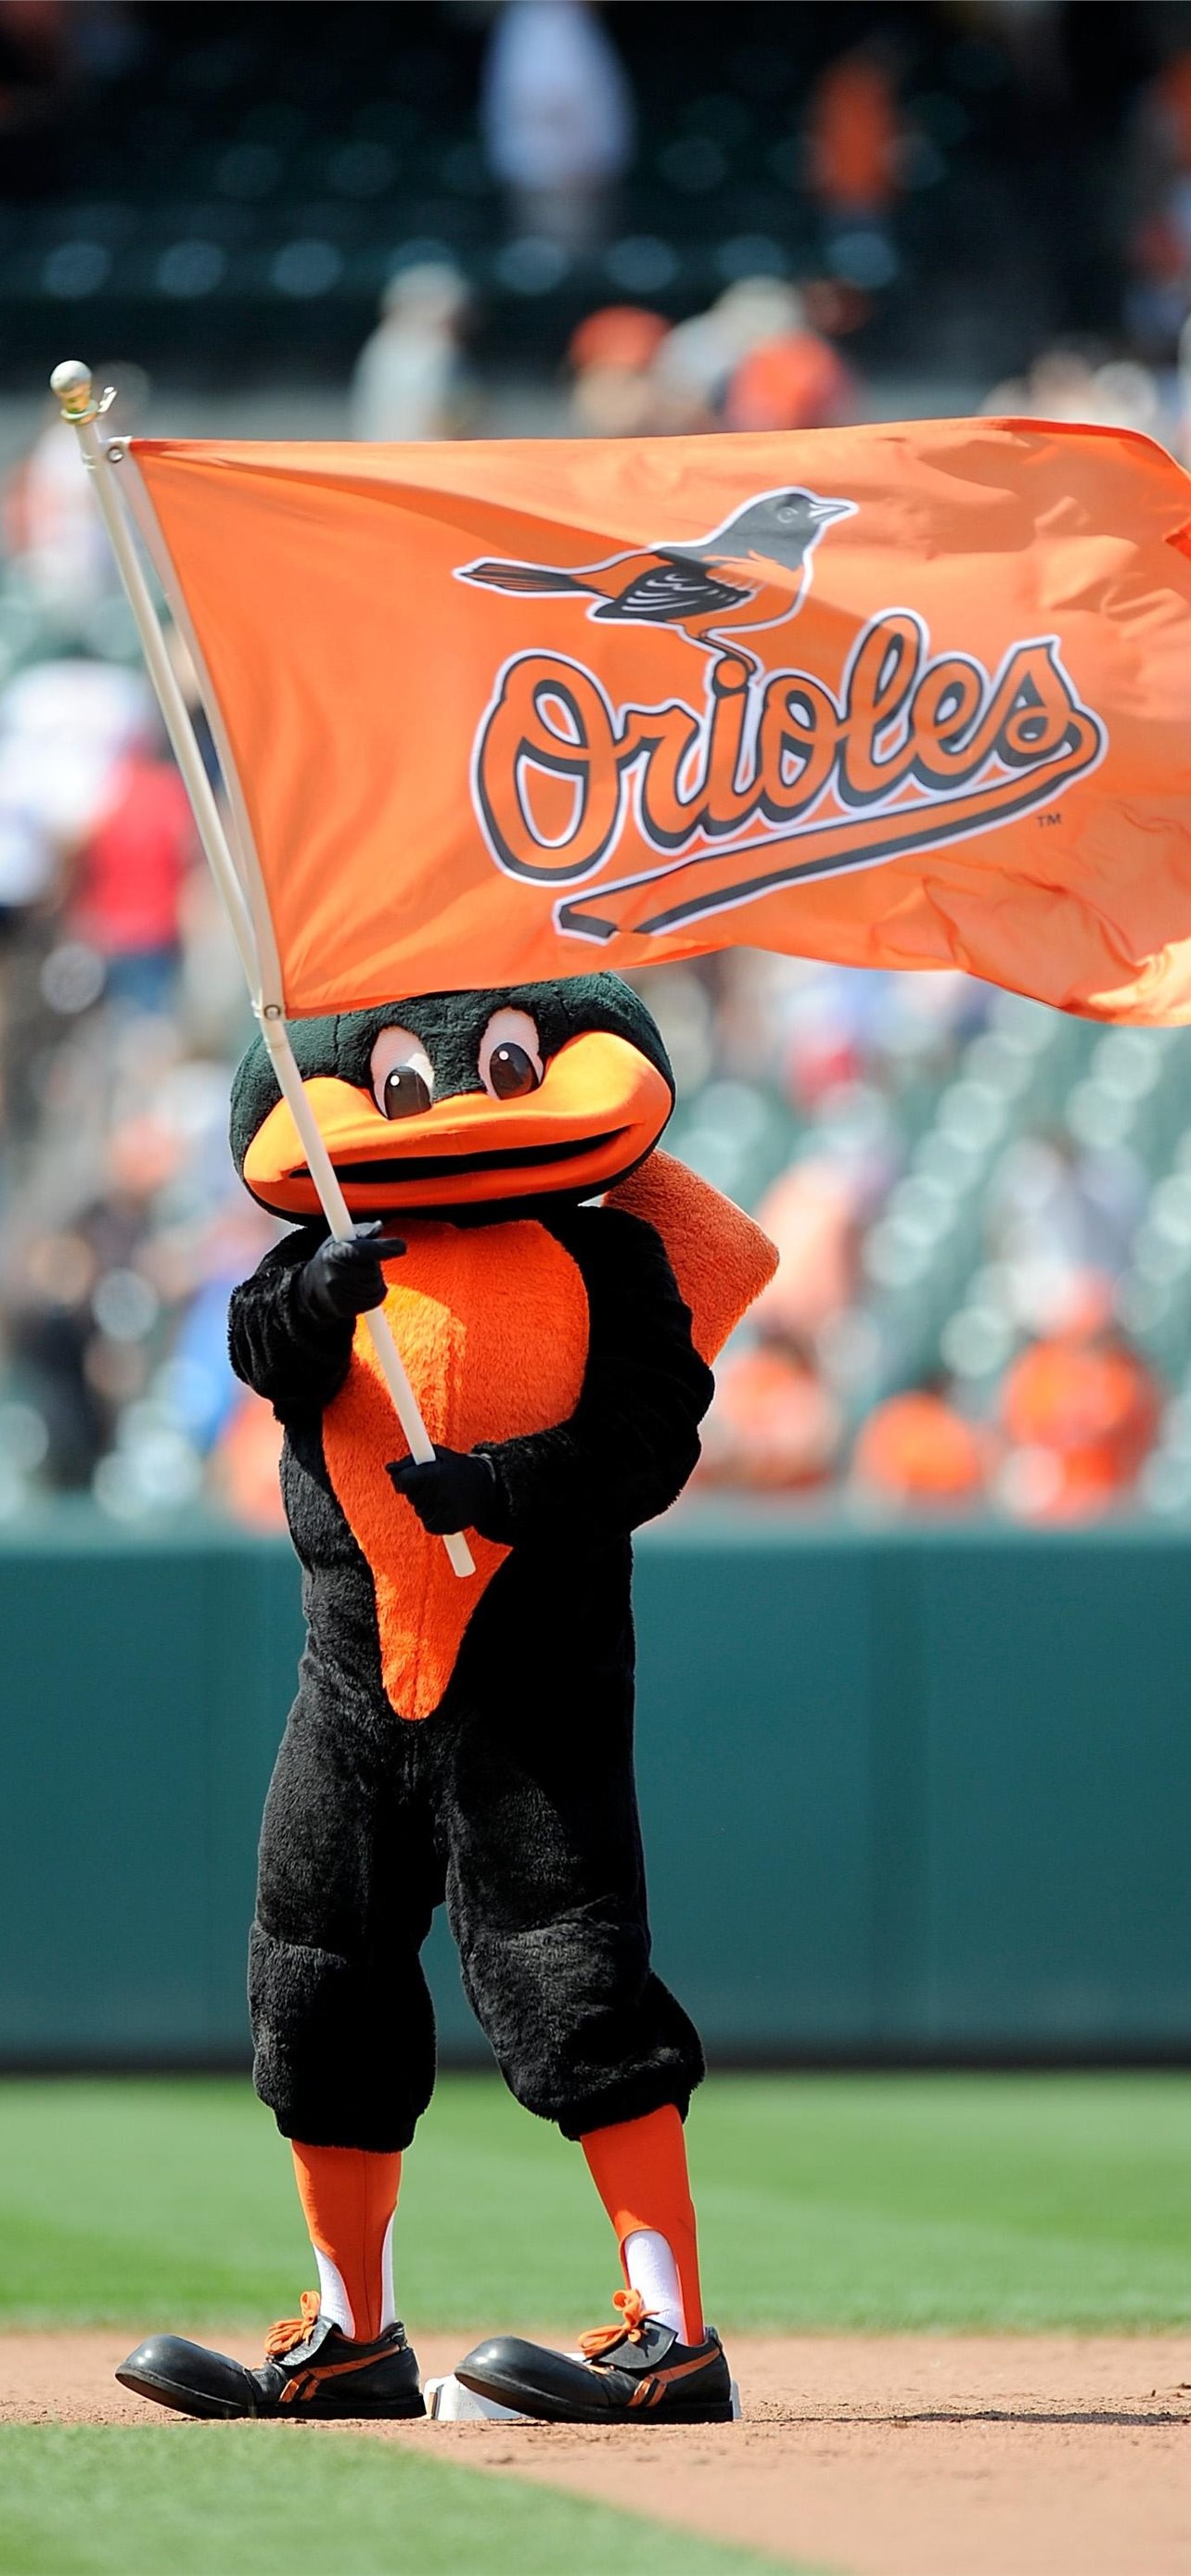 Baltimore Orioles, Sports team, iPhone wallpapers, Team logo, 1290x2780 HD Phone